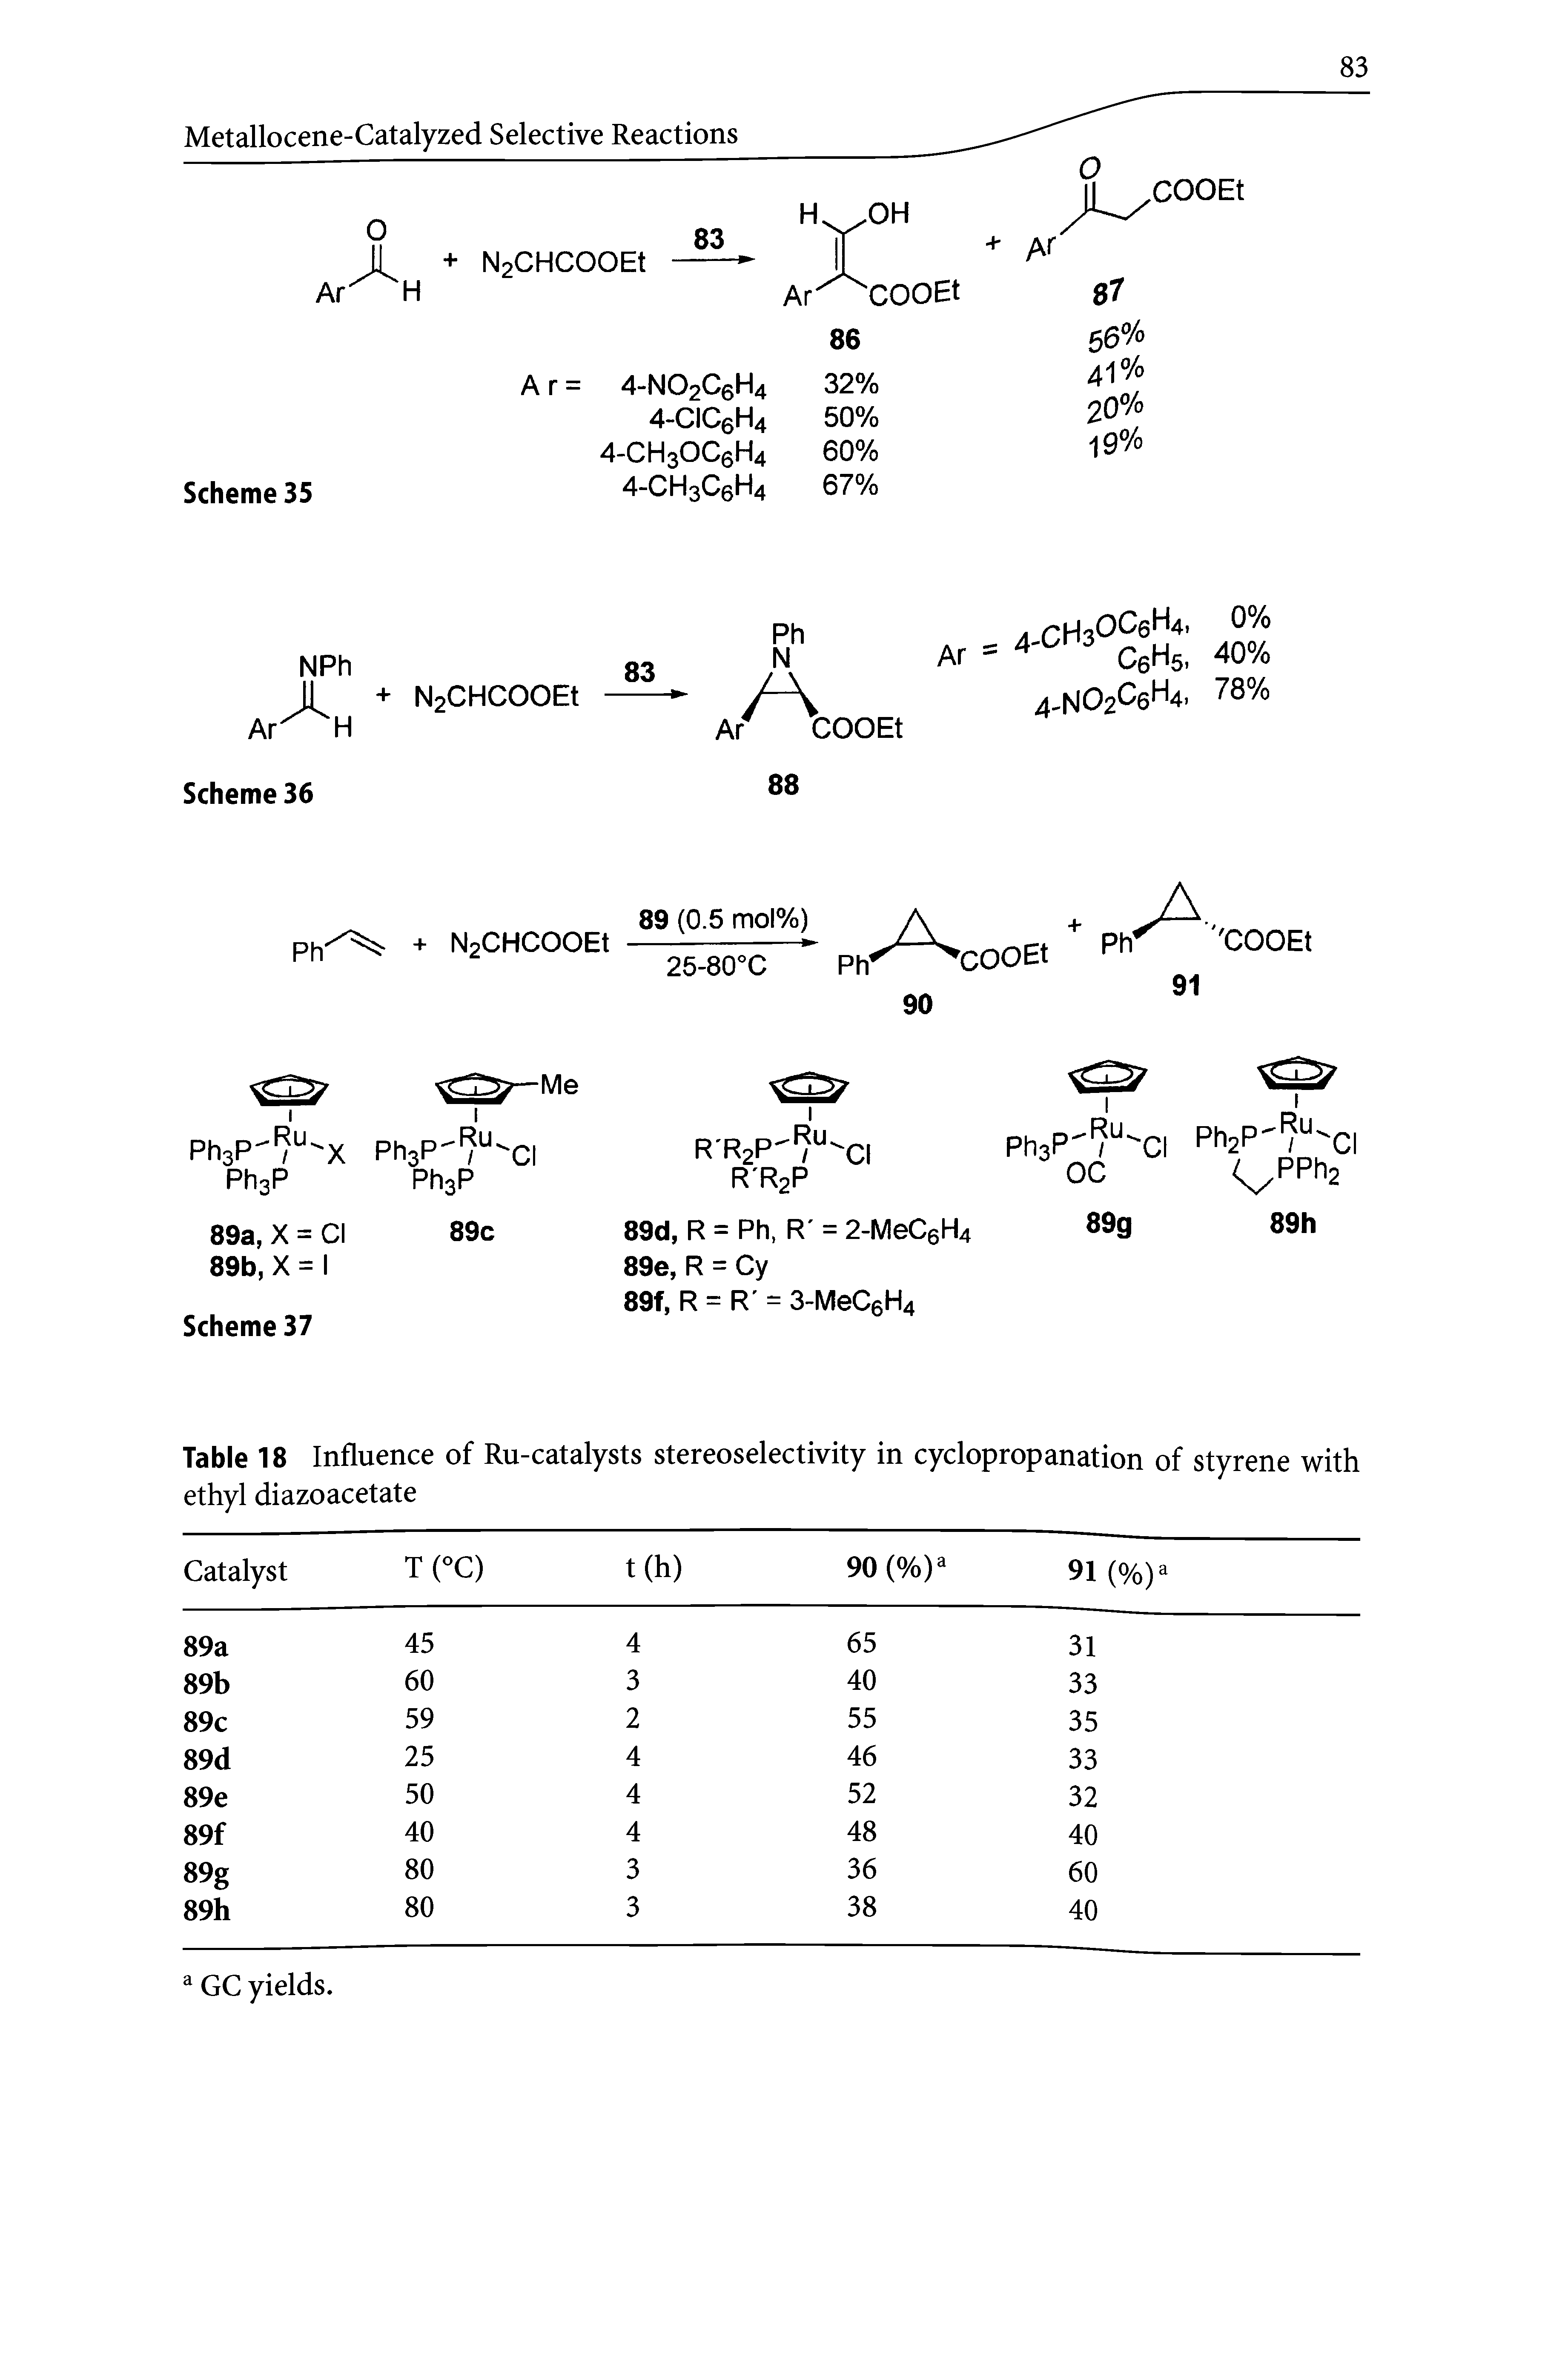 Table 18 Influence of Ru-catalysts stereoselectivity in cyclopropanation of styrene with ethyl diazoacetate...